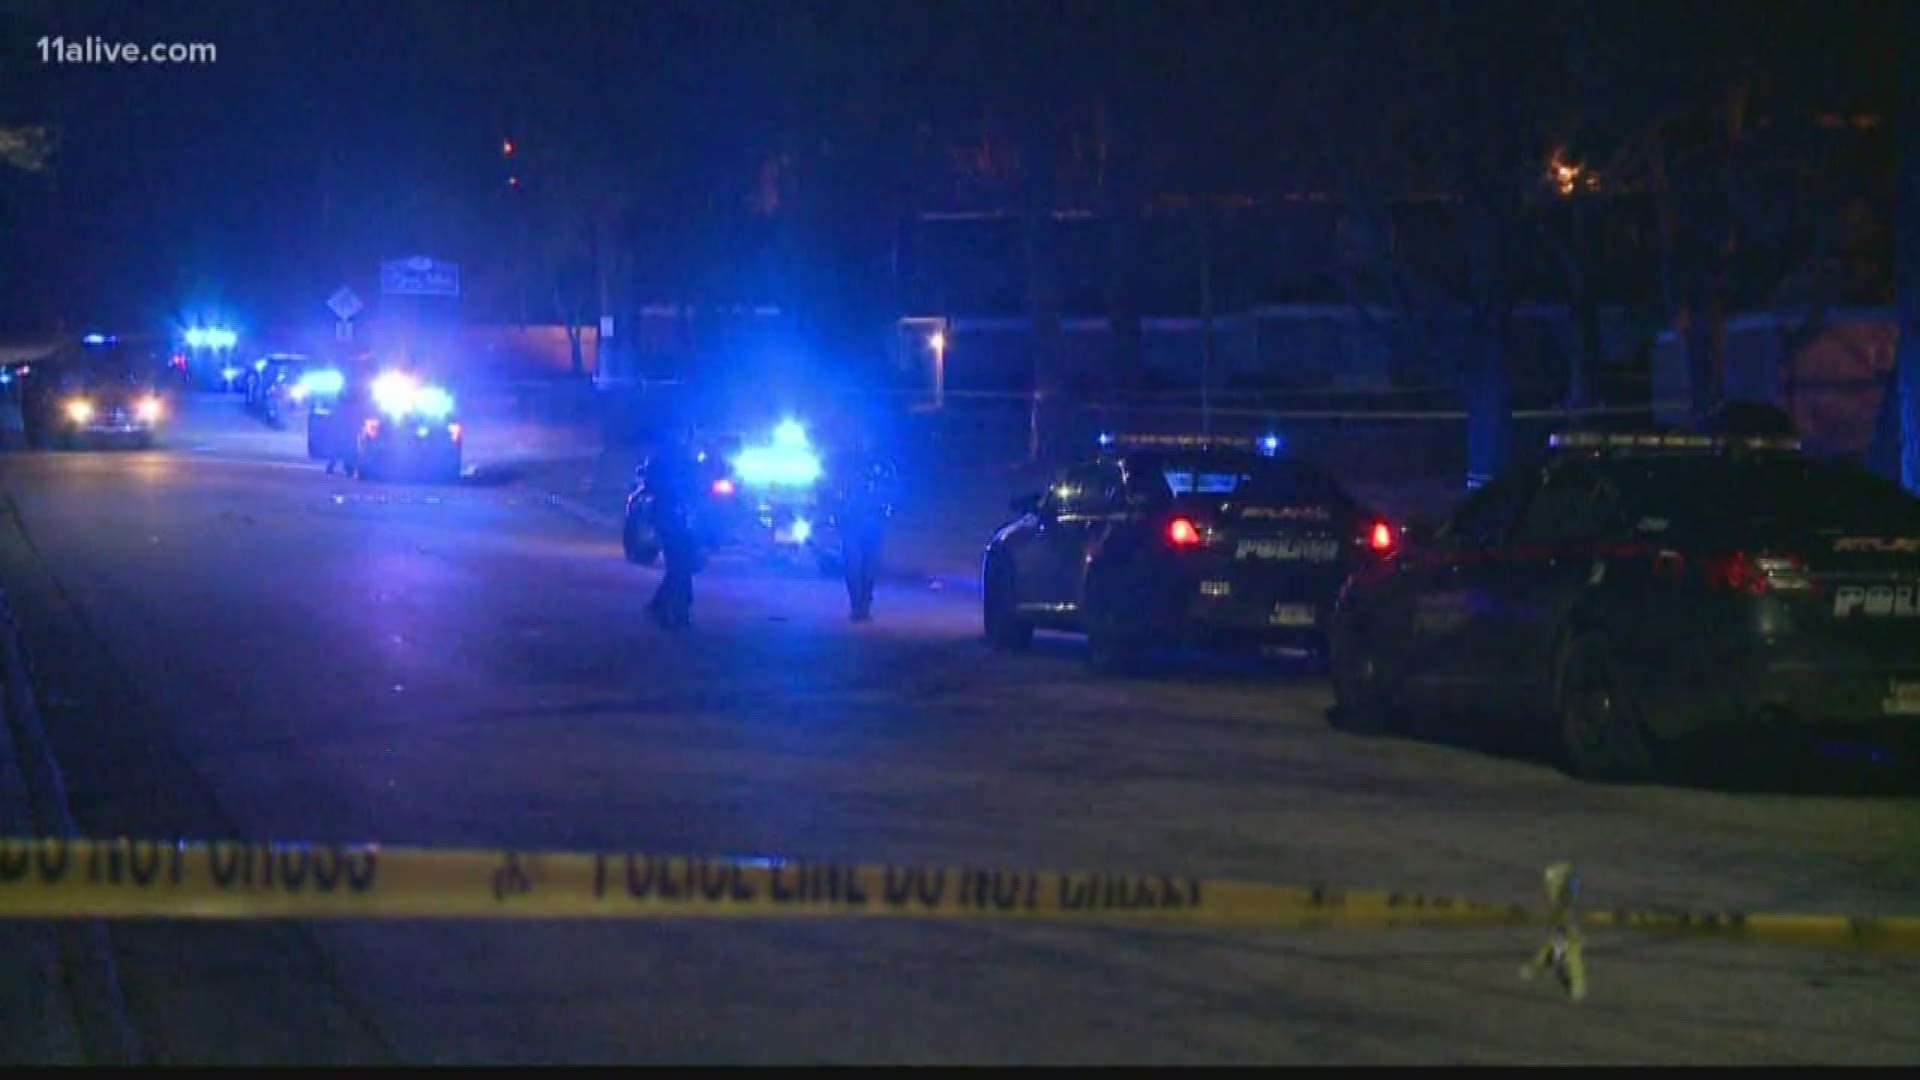 A man and woman were taken to the hospital in critical condition after a shooting late Saturday night following a shooting at a condominium in southwest Atlanta.